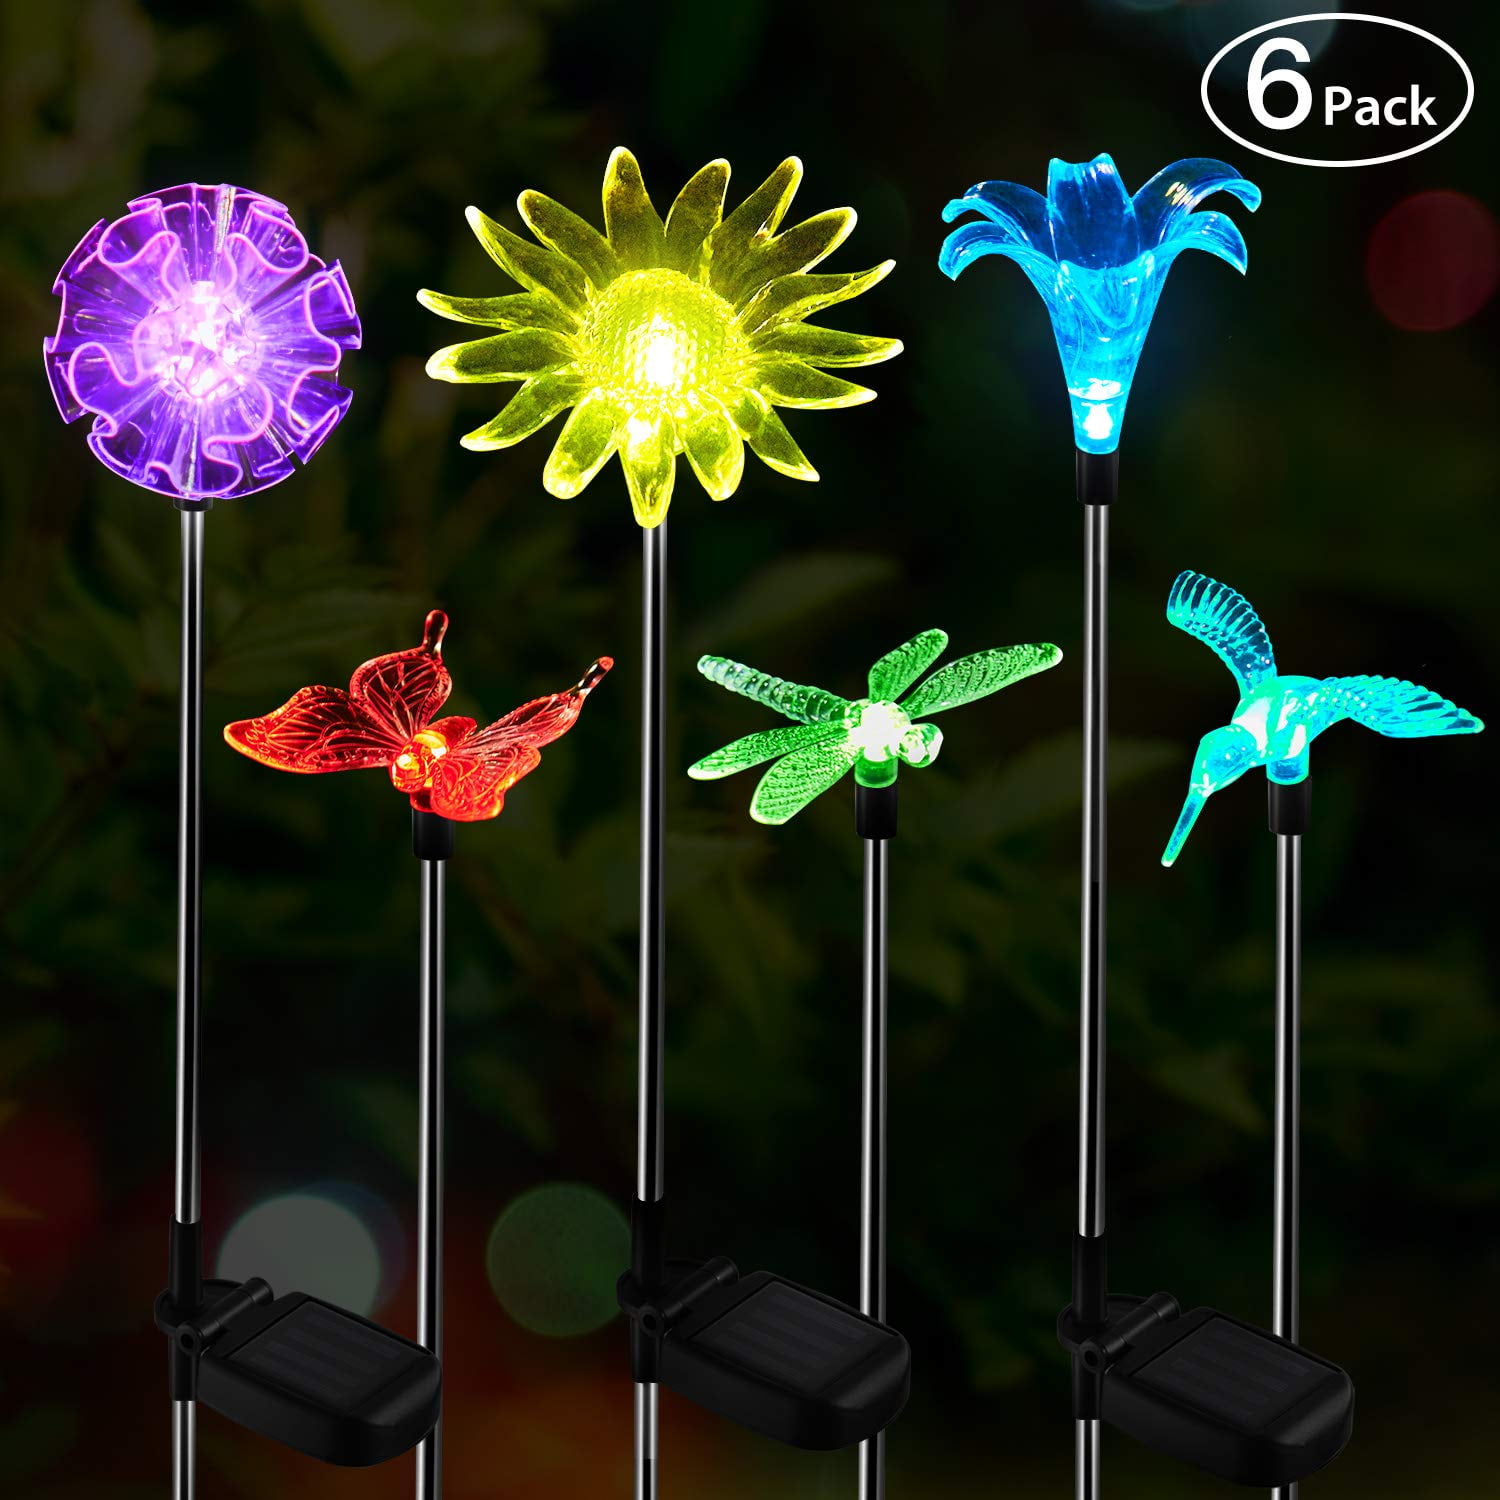 3Pack LED Solar Glass Garden Decor Stake Outdoor Patio Path Color Change Light 